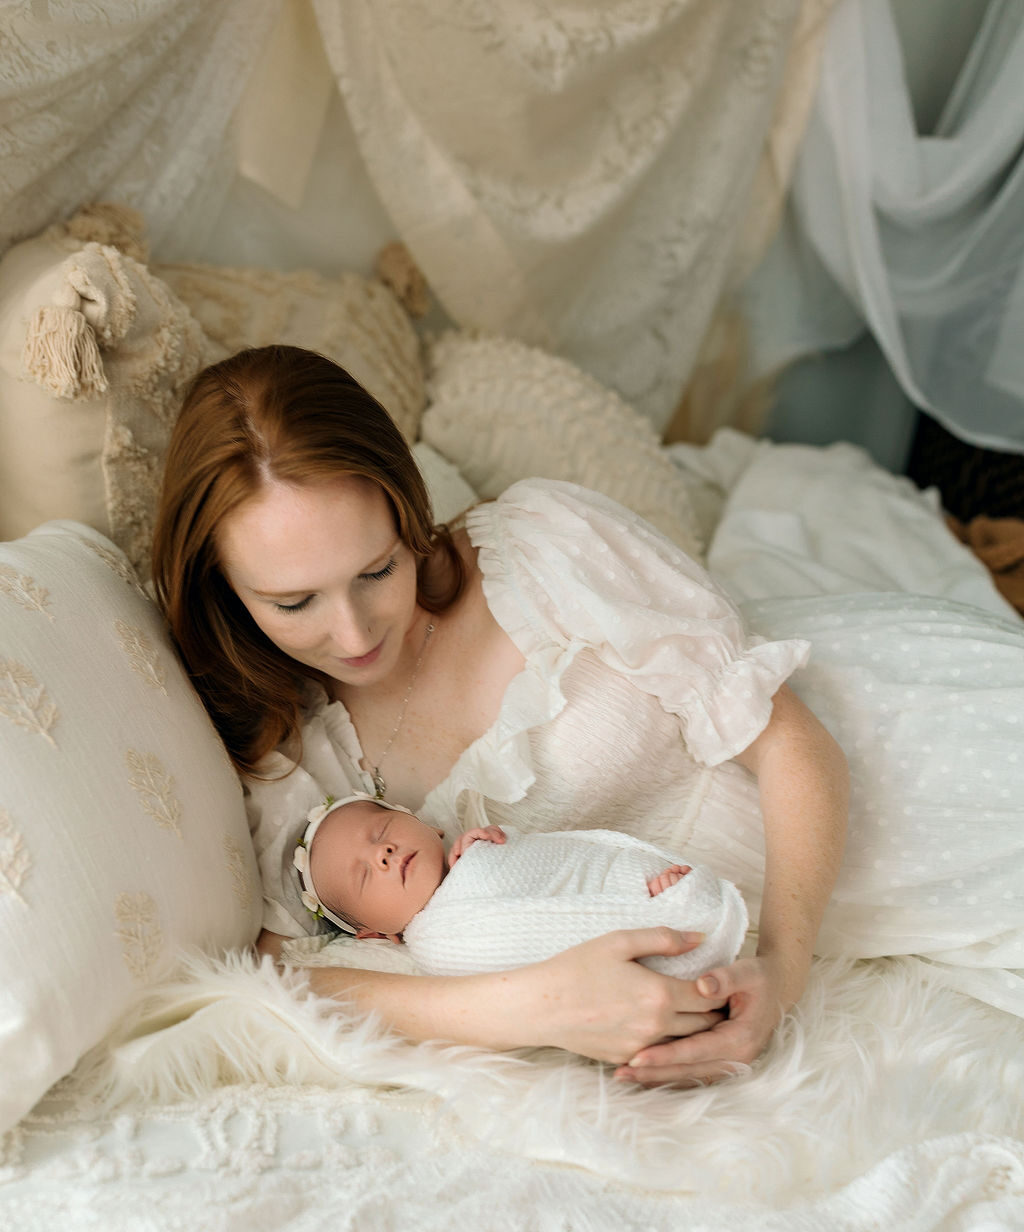 A mother in a white dress cuddles with her sleeping newborn baby on a bed virginia fertility and ivf